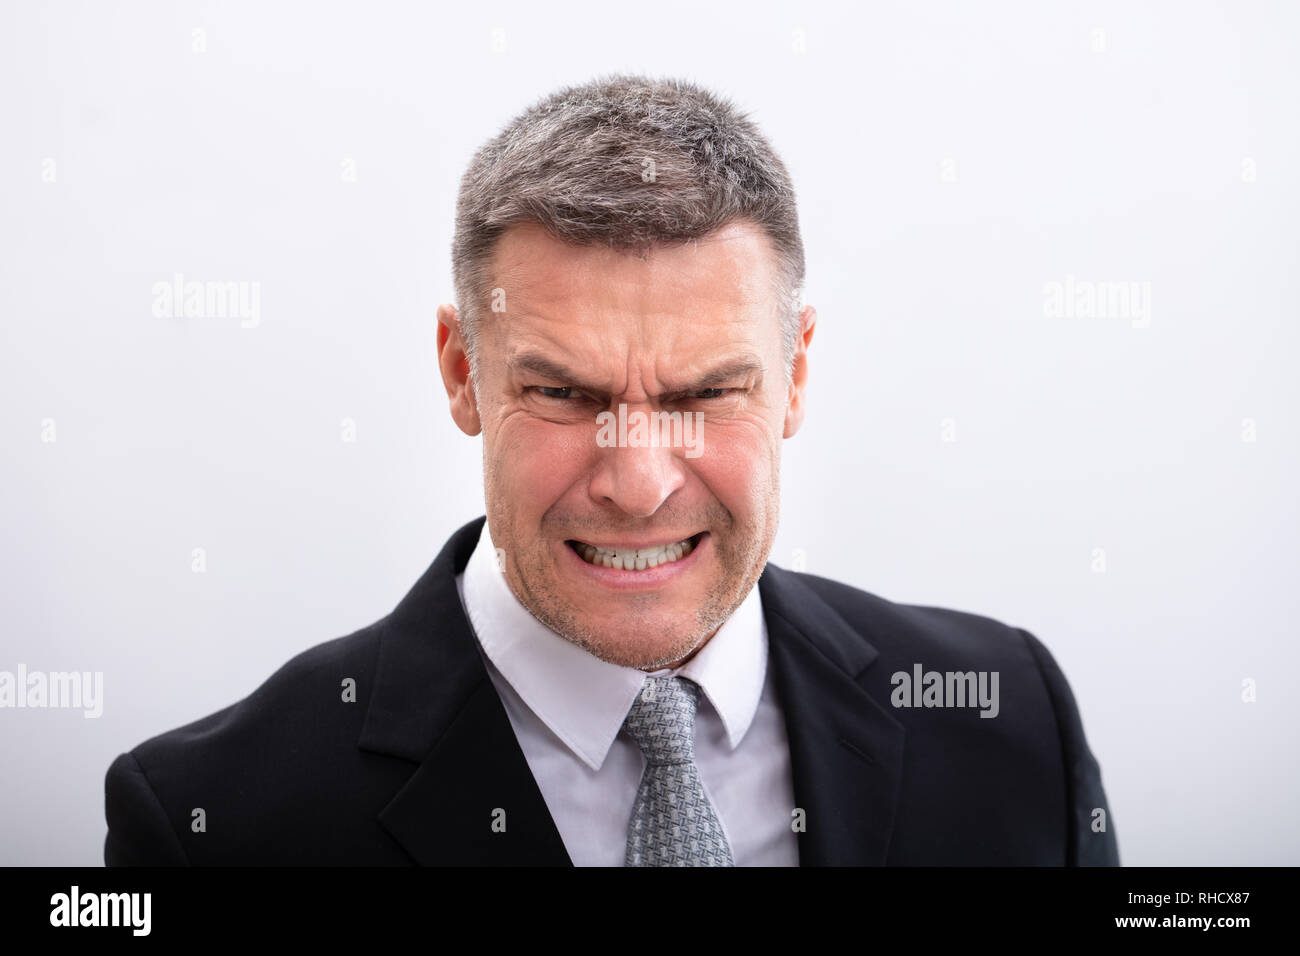 An Angry Mature Businessman Clenching His Teeth Against White Background Stock Photo